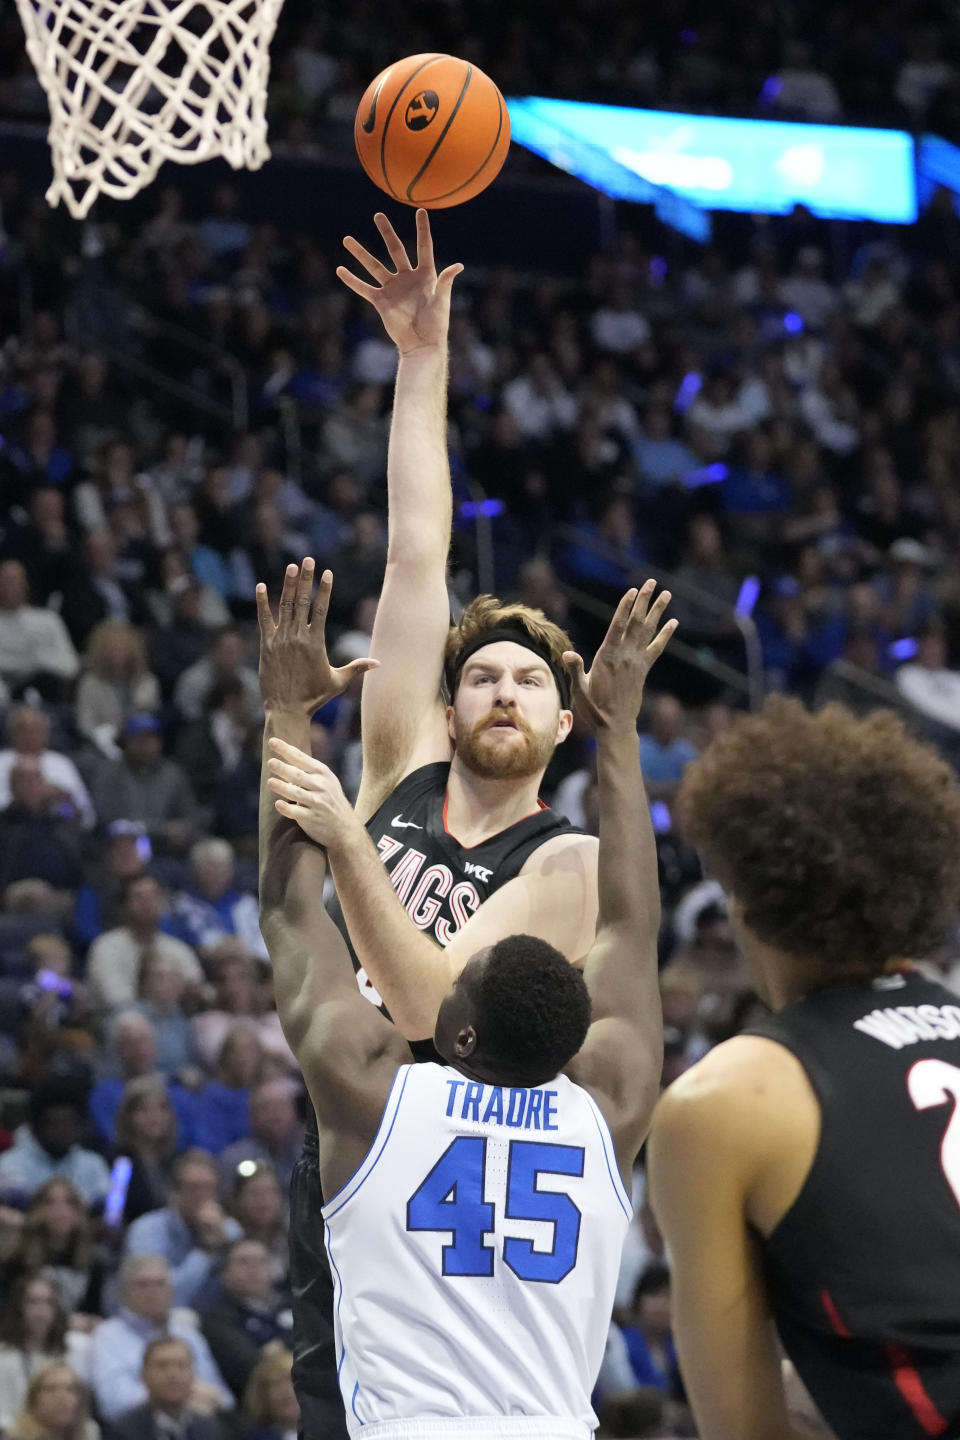 Gonzaga forward Drew Timme shoots as BYU forward Fousseyni Traore (45) defends during the first half of an NCAA college basketball game Thursday, Jan. 12, 2023, in Provo, Utah. (AP Photo/Rick Bowmer)